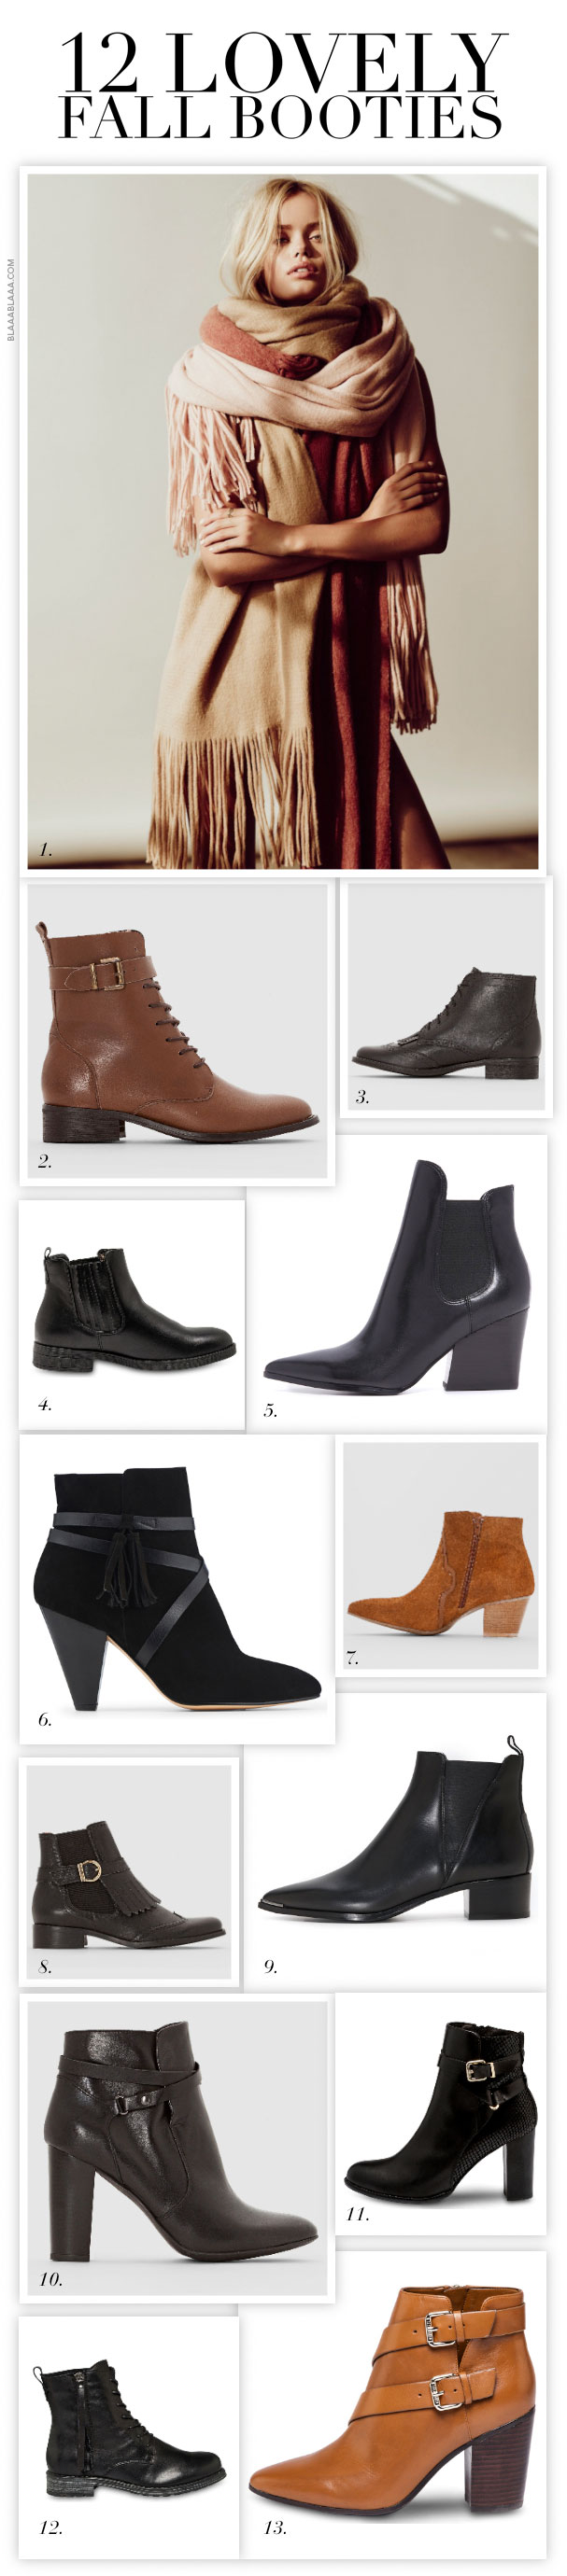 12 Lovely Fall Booties